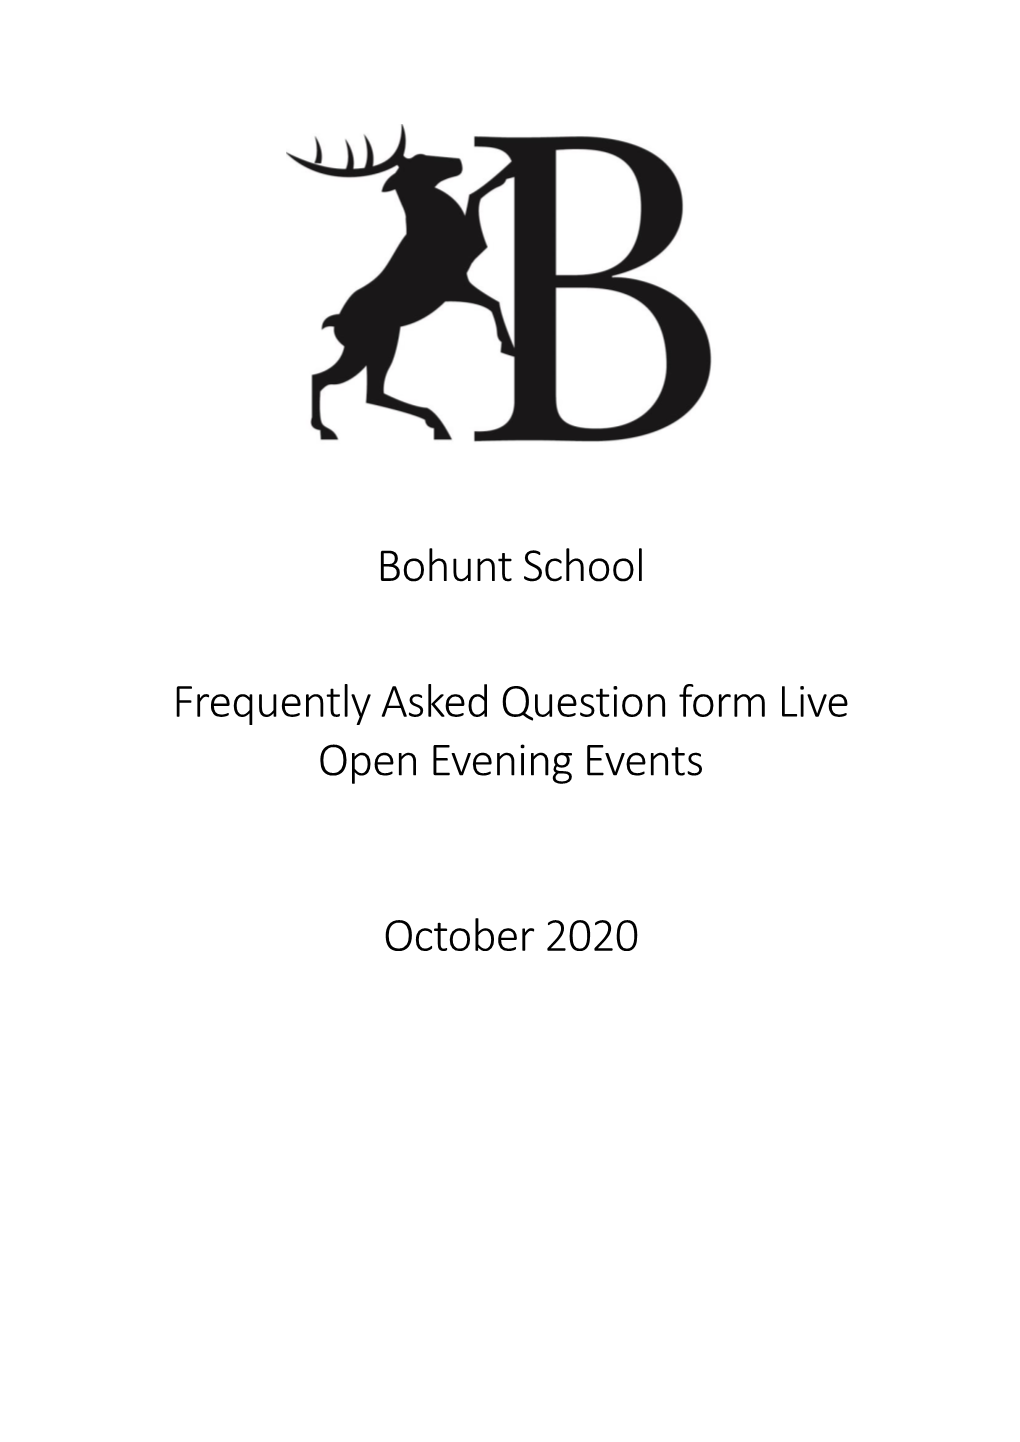 Bohunt School Frequently Asked Question Form Live Open Evening Events October 2020